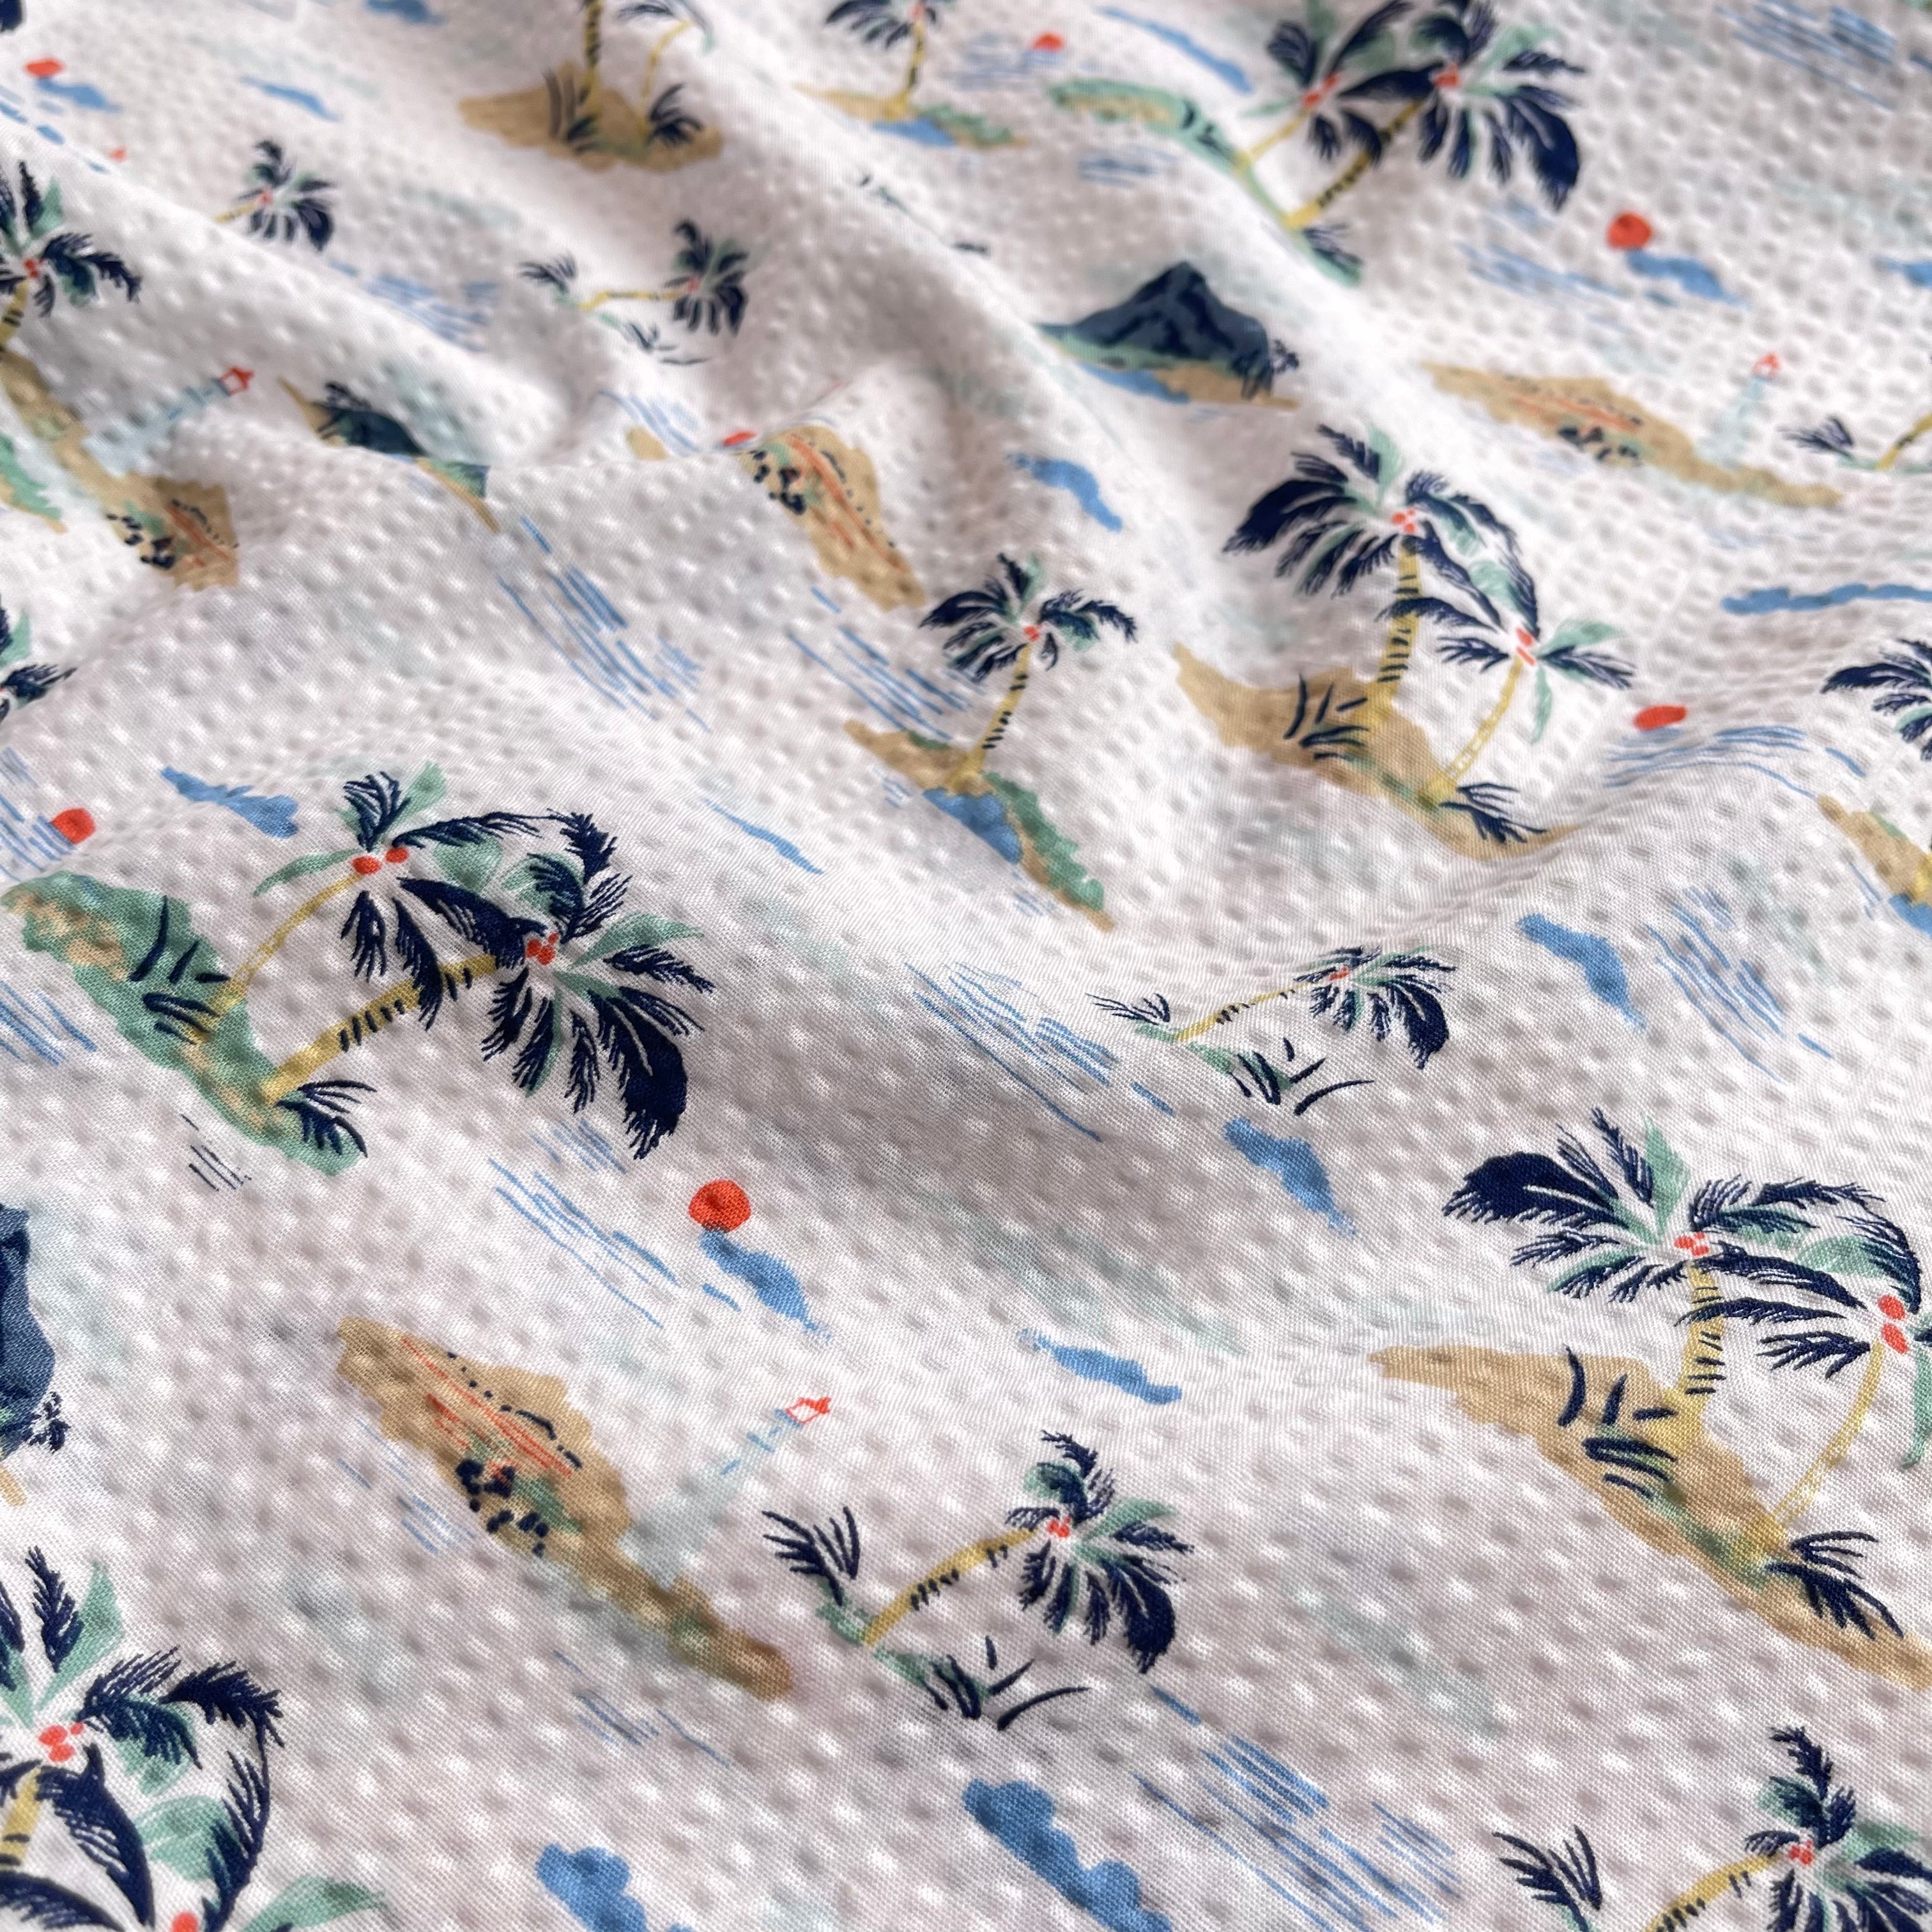 REMNANT 0.56 Metre - Holiday Islands on White Cotton Seersucker Fabric